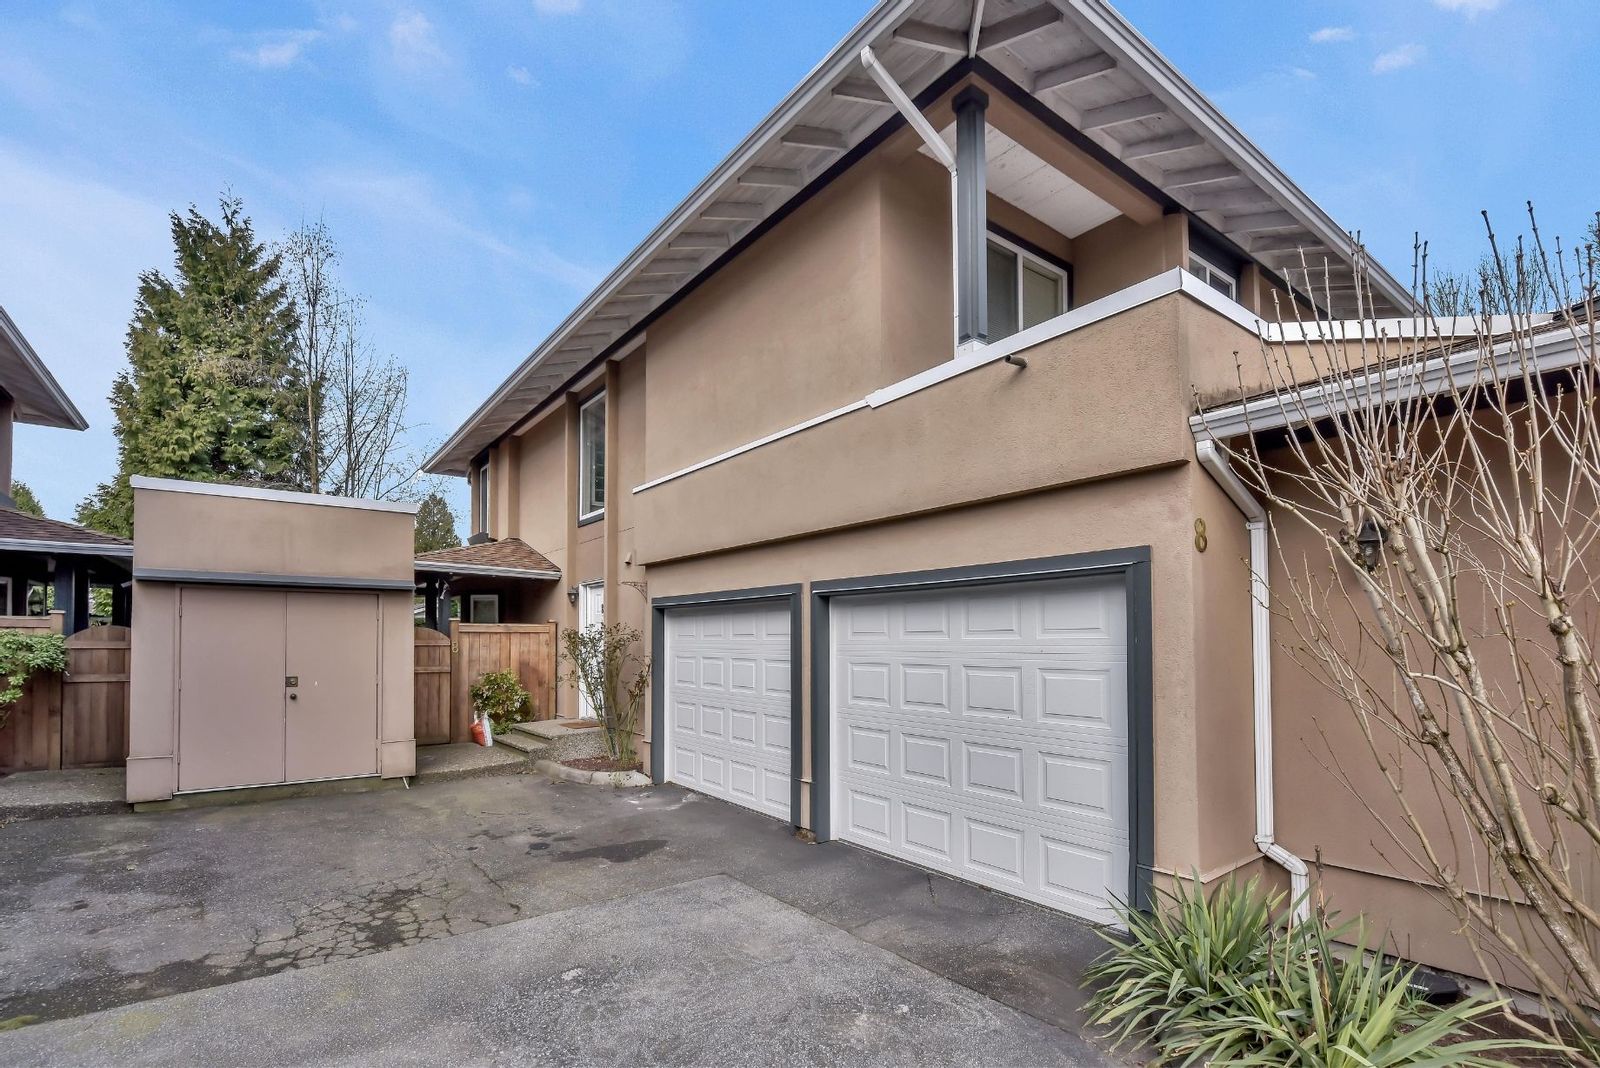 Coming Soon!! 3 Bed / 3 Bath Townhouse in Pitt Meadows!